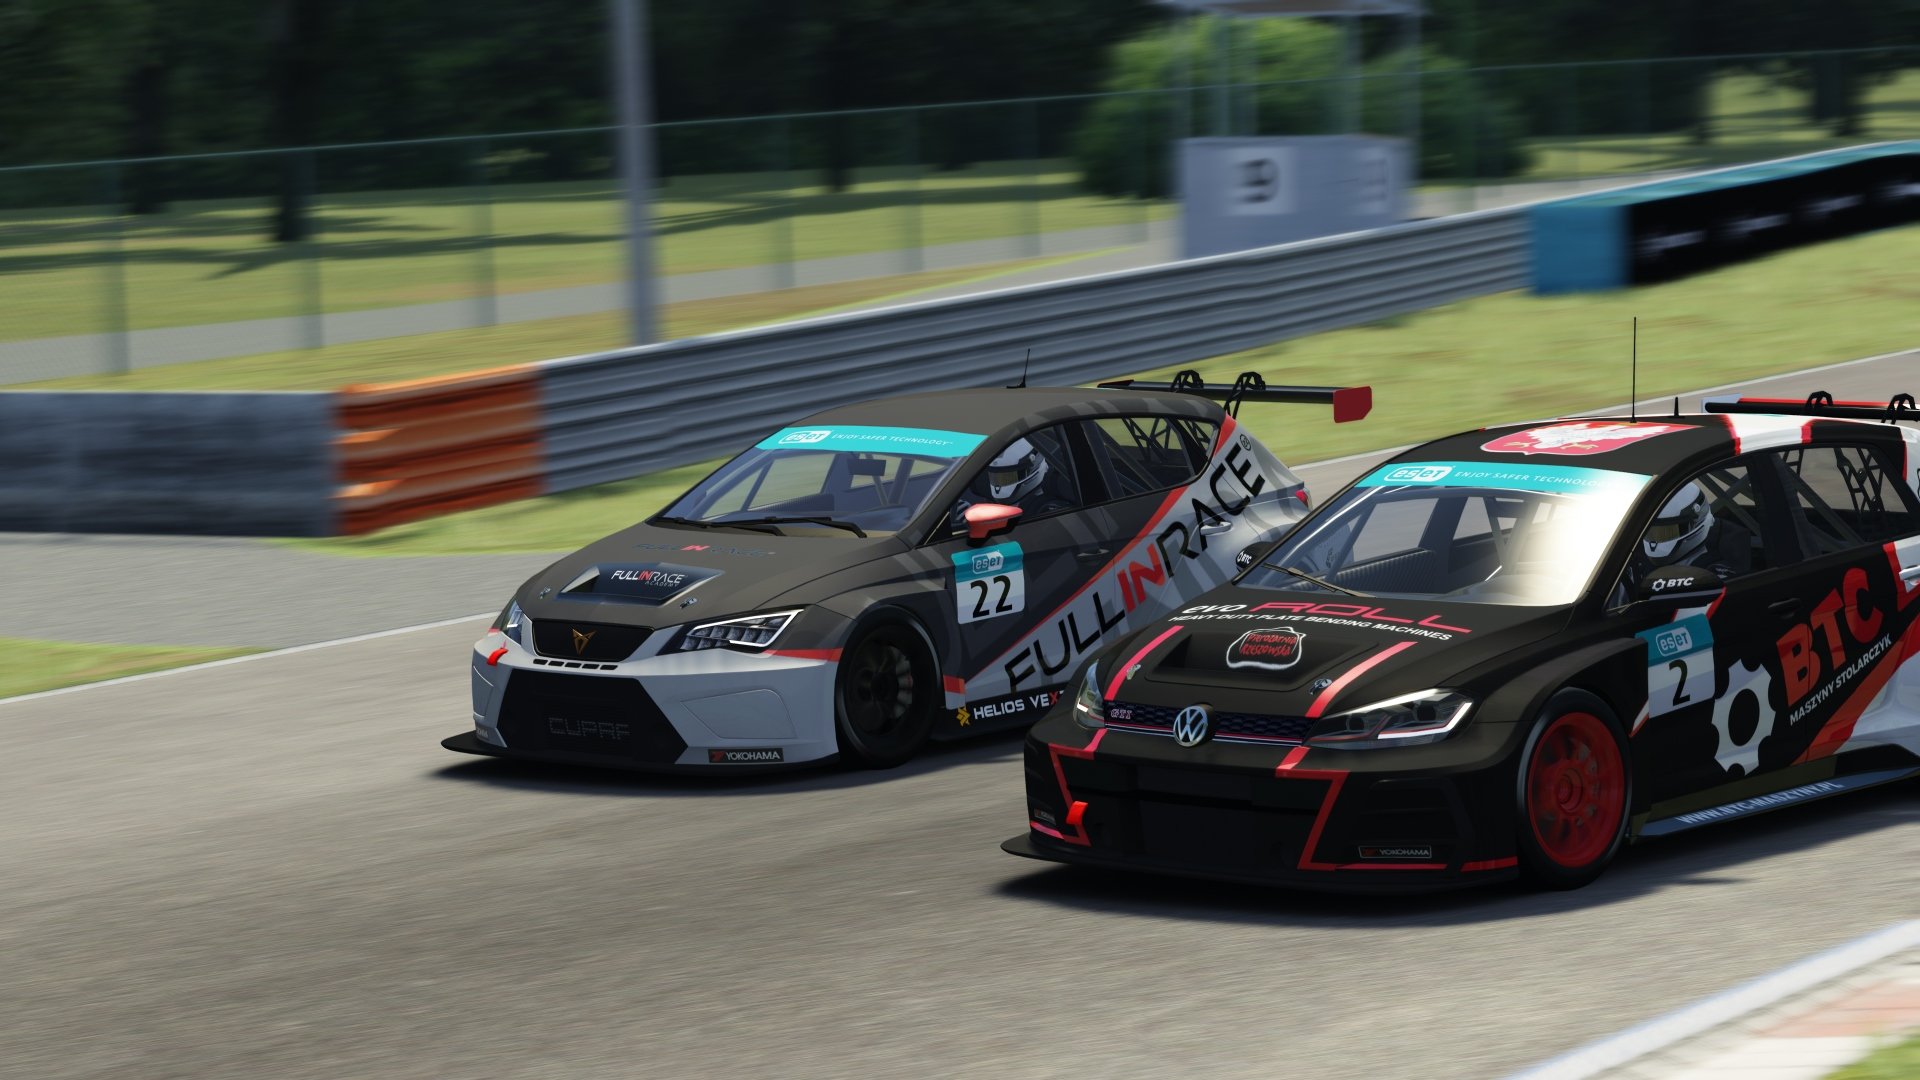 More information about "TCR Eastern Europe Simracing: stasera live alle 21 il round 2 dal Red Bull Ring"